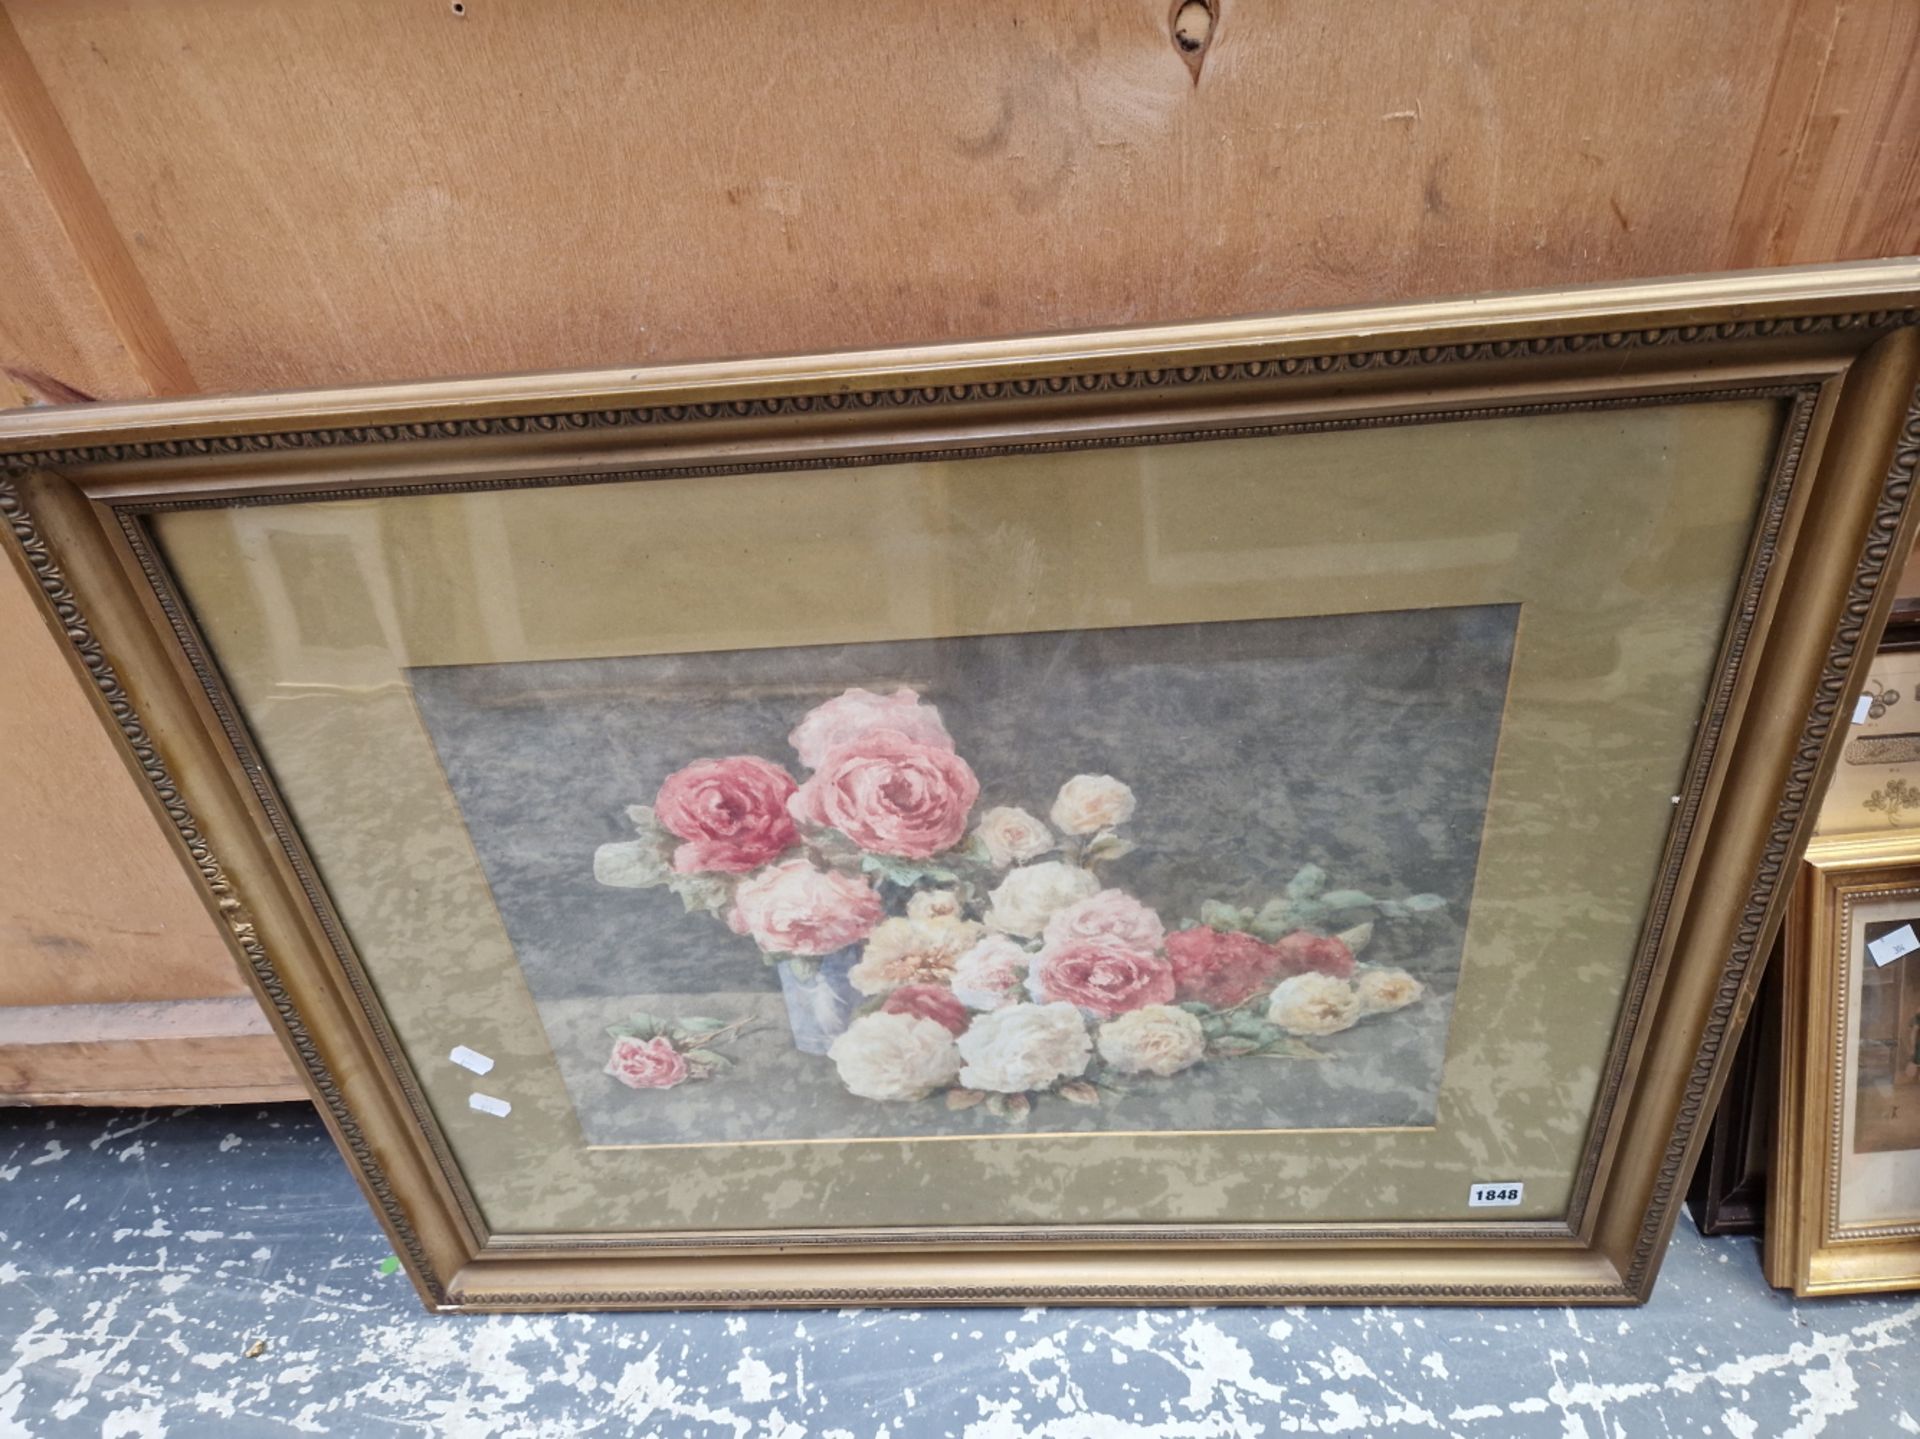 C. WINDSOR 19th/20th CENTURY ENGLISH SCHOOL STILL LIFE OF ROSES, SIGNED, WATERCOLOUR. 36 x 54cms - Image 5 of 6